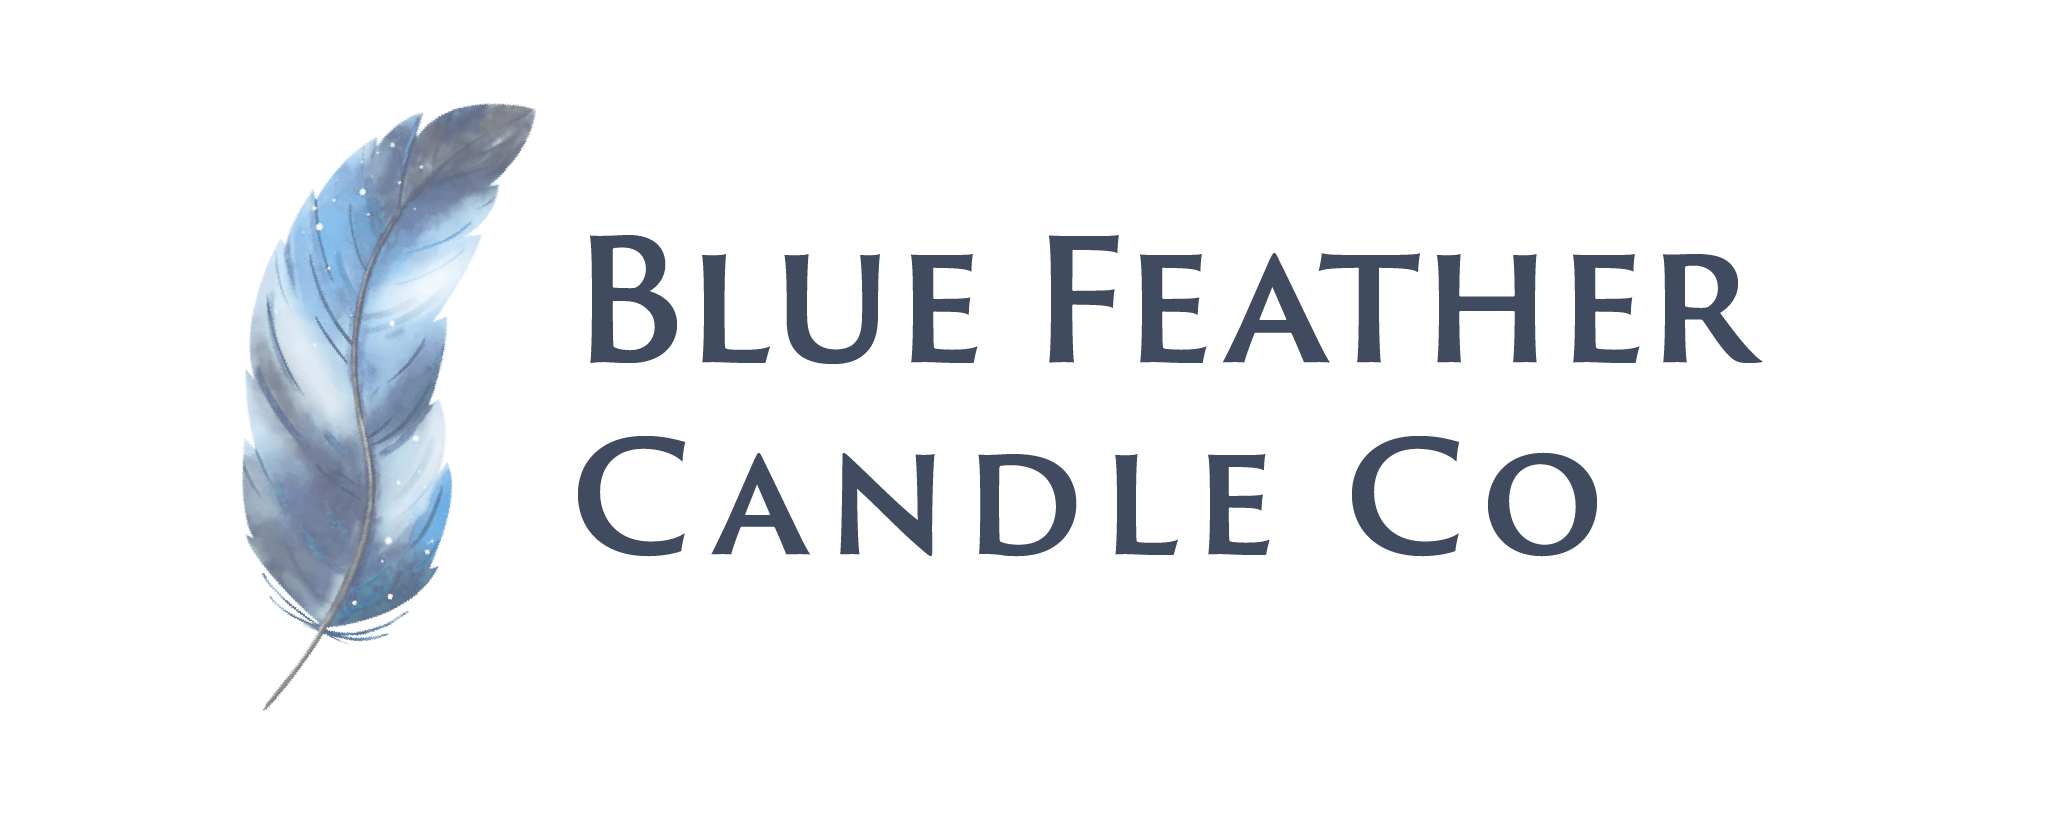 Blue Feather Candle Company